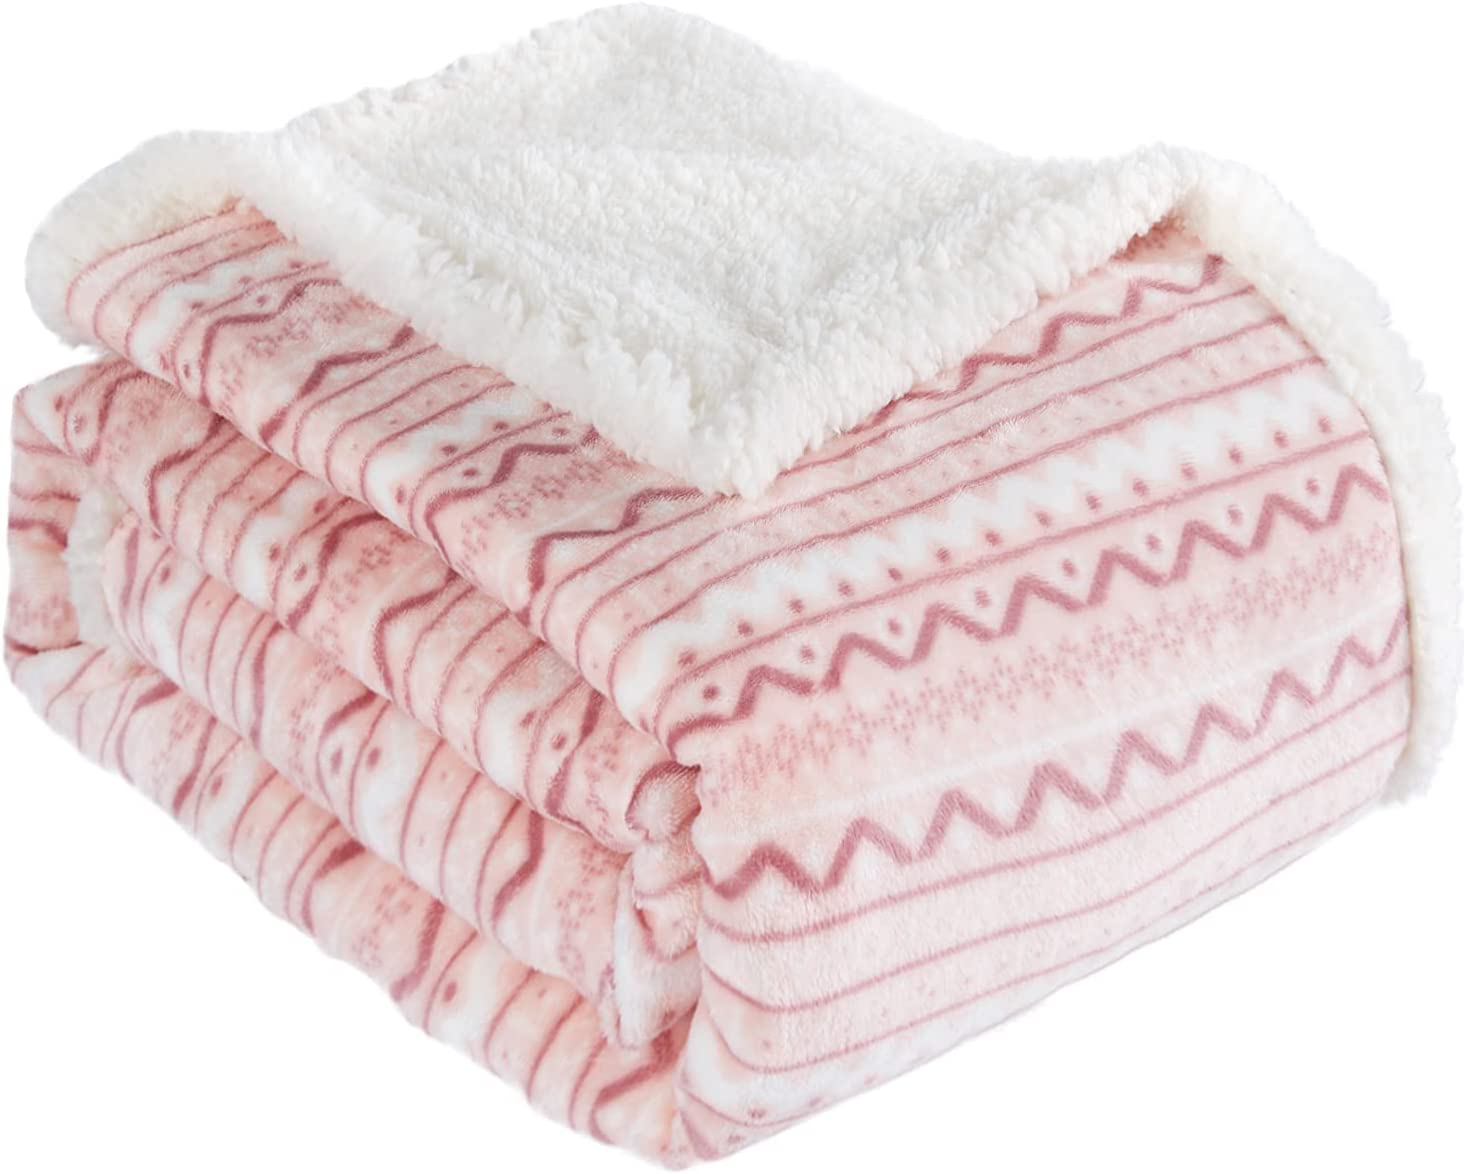 Renewable Design for Sherpa Fabric Supplier - Sherpa Fleece Throw Blanket for Young Girls Super Soft Fuzzy Cozy Plush Pink Sherpa Plush Throw Blanket for Kids Children Teens or Adult for Sofa Couc...